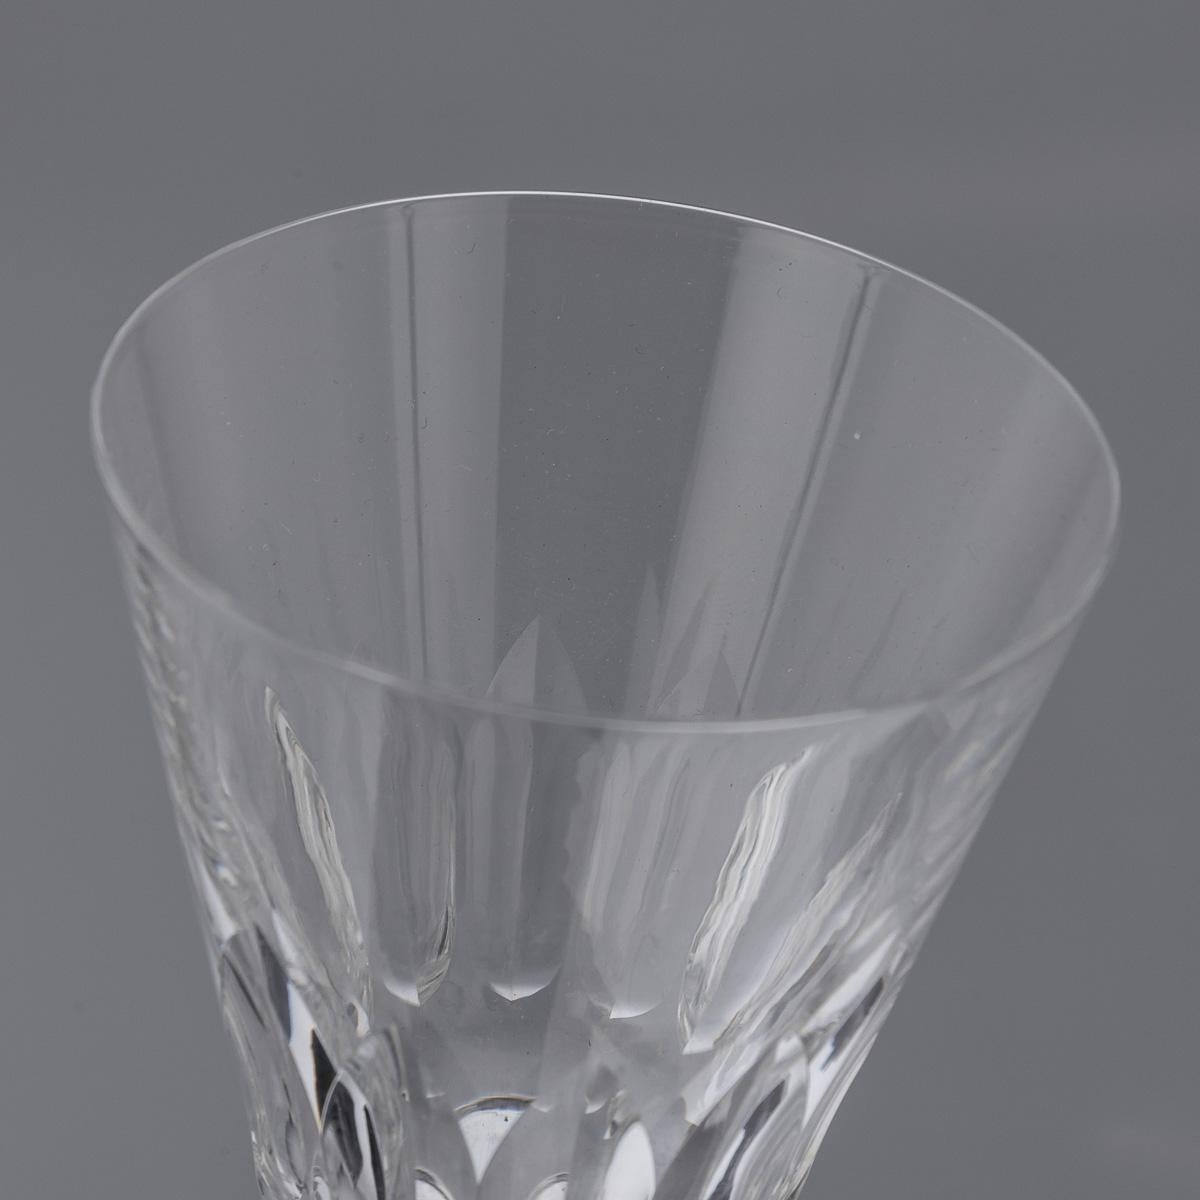 20th Century Complete Set Of 36 Drinking Glasses By Baccarat, France, c.1960